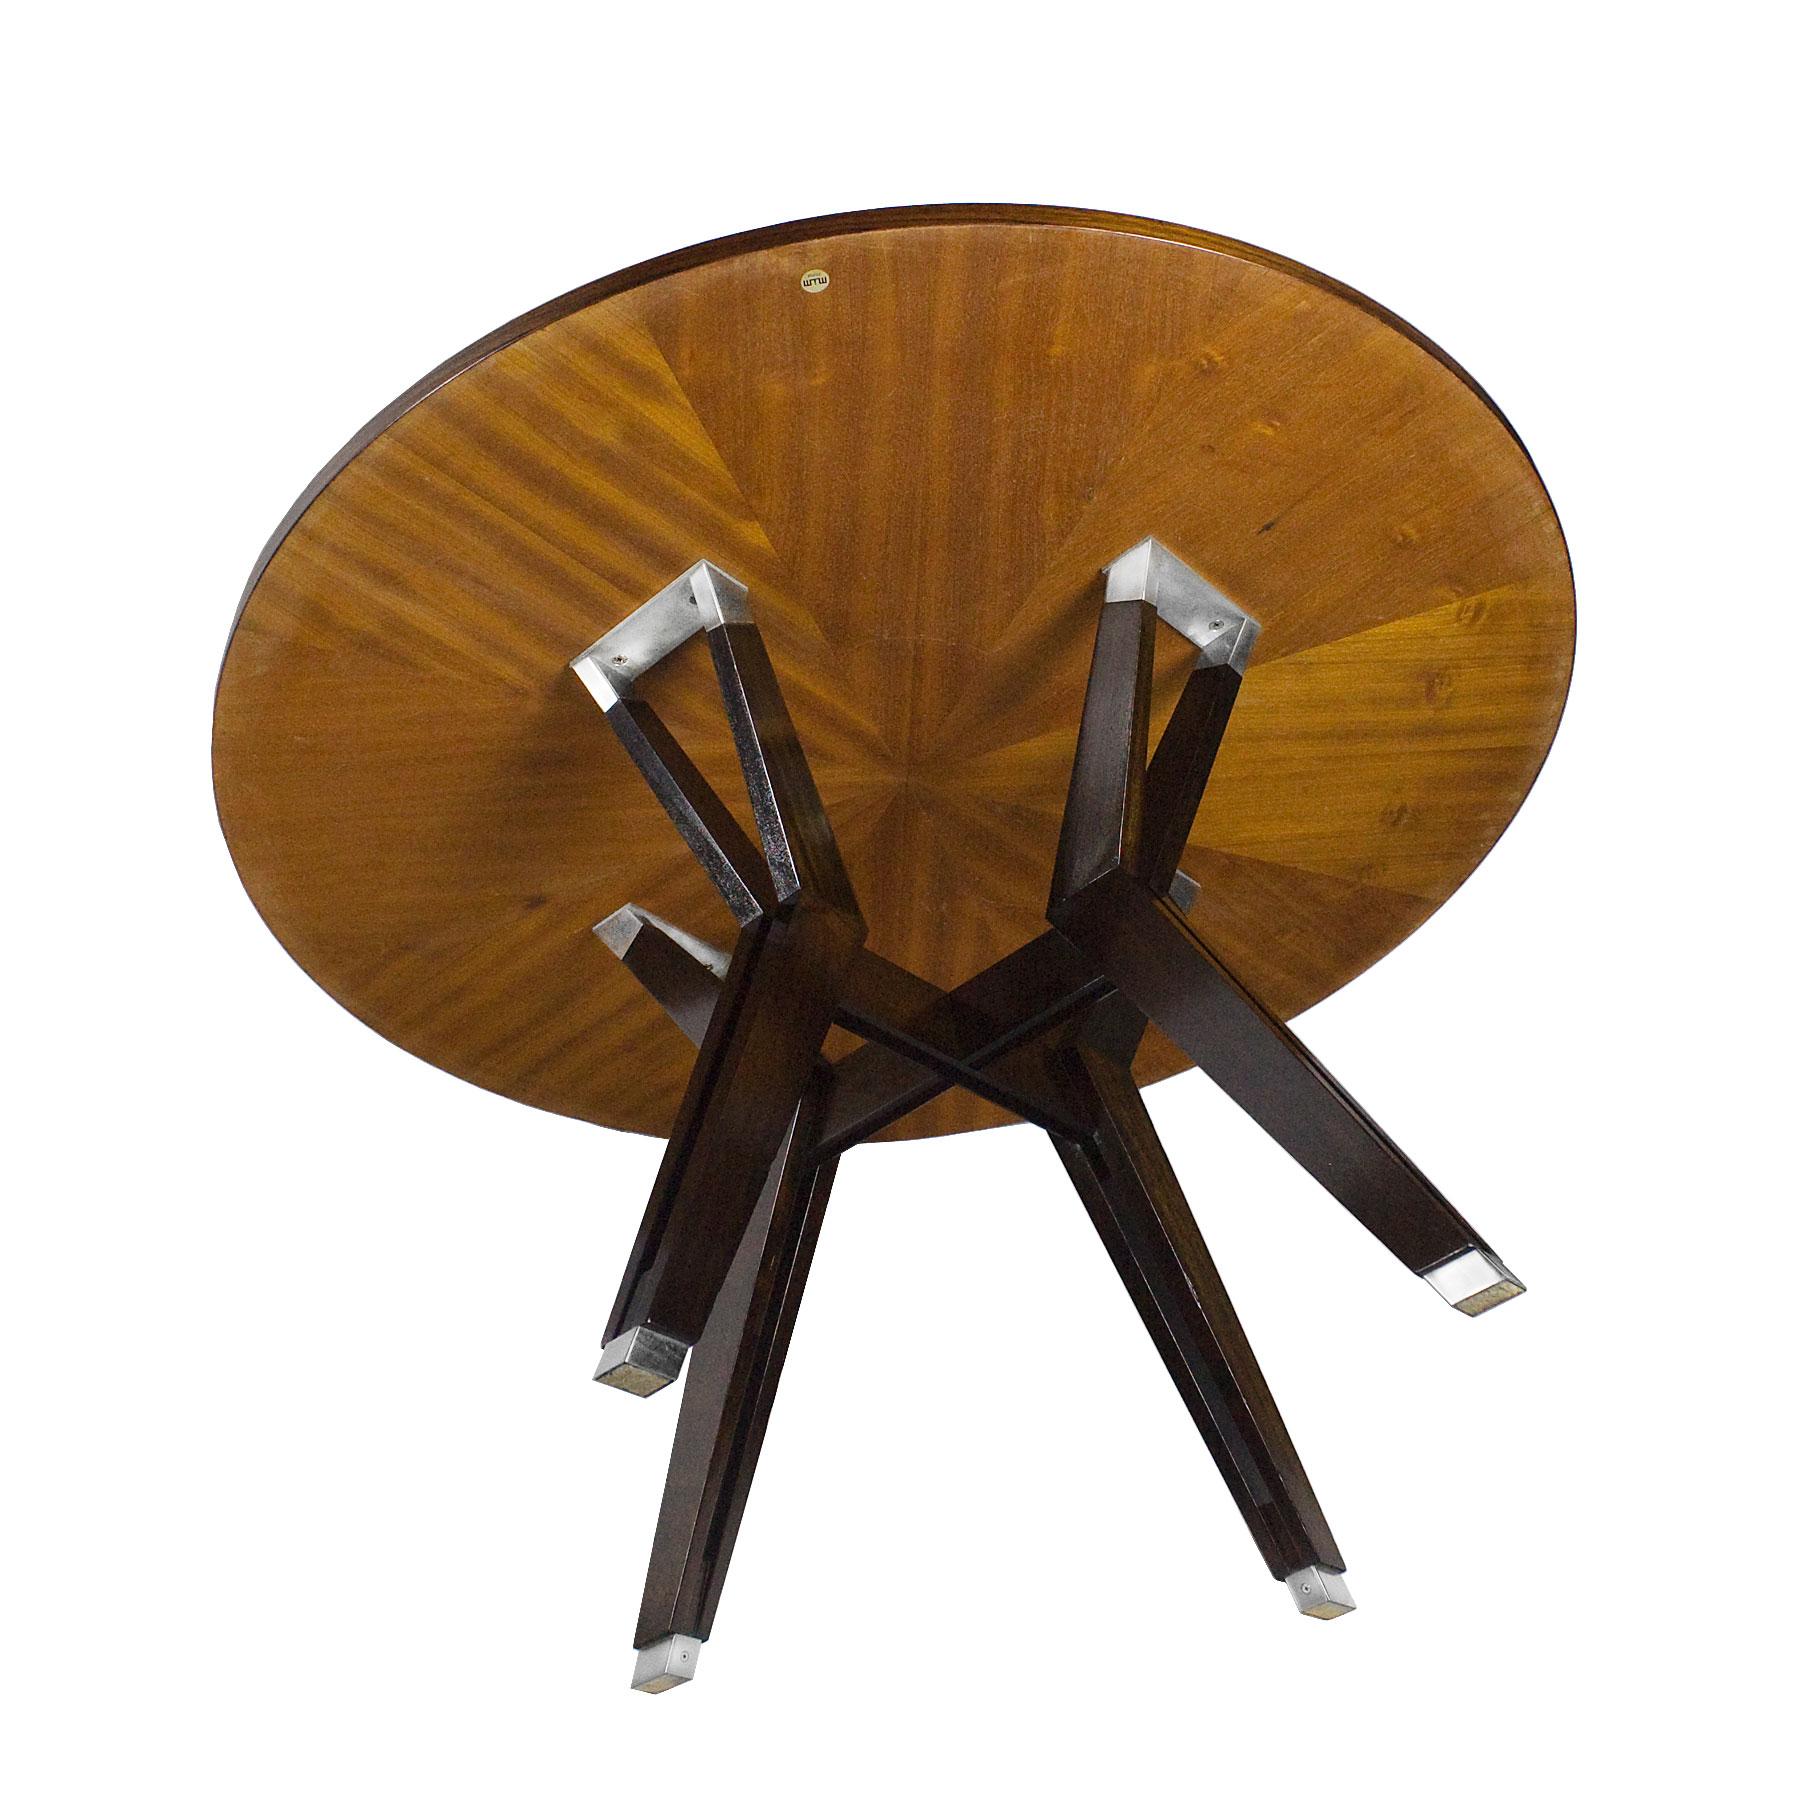 Mid-20th Century Mid-Century Modern Table by Ico Parisi in Walnut and Mahogany Palm -  Italy For Sale